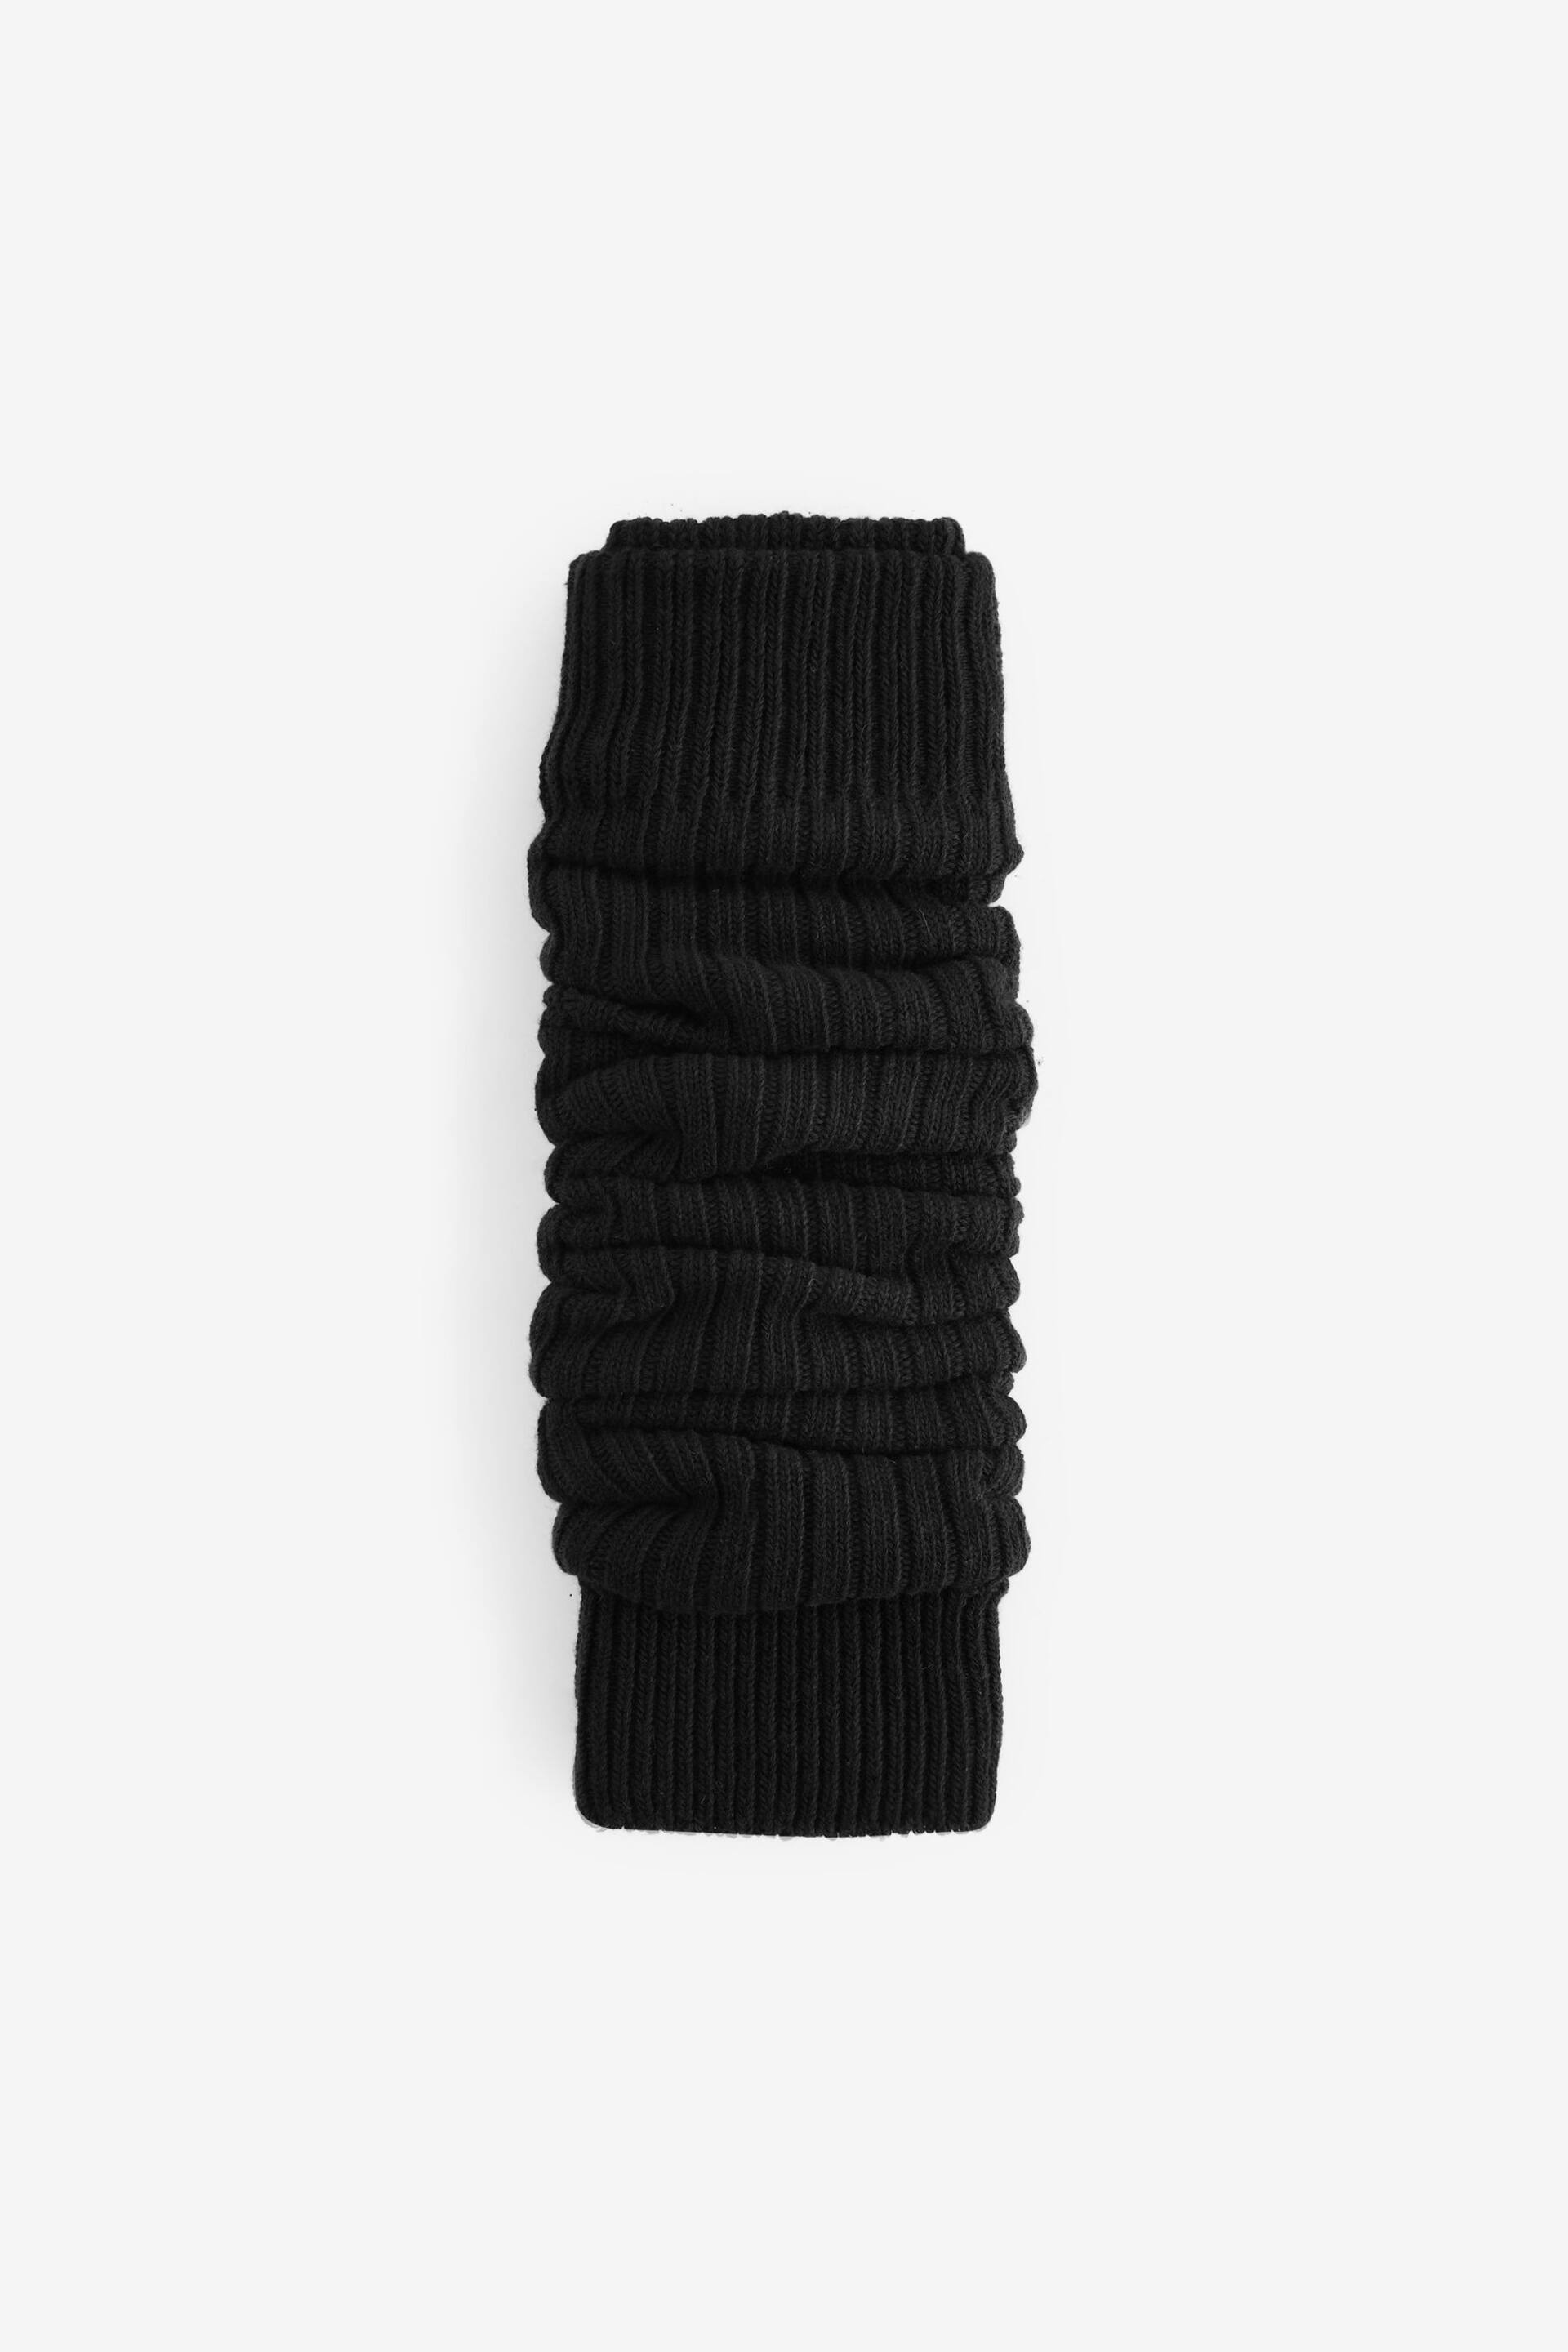 Black Ribbed Leg Warmers 1 Pack - Image 1 of 1